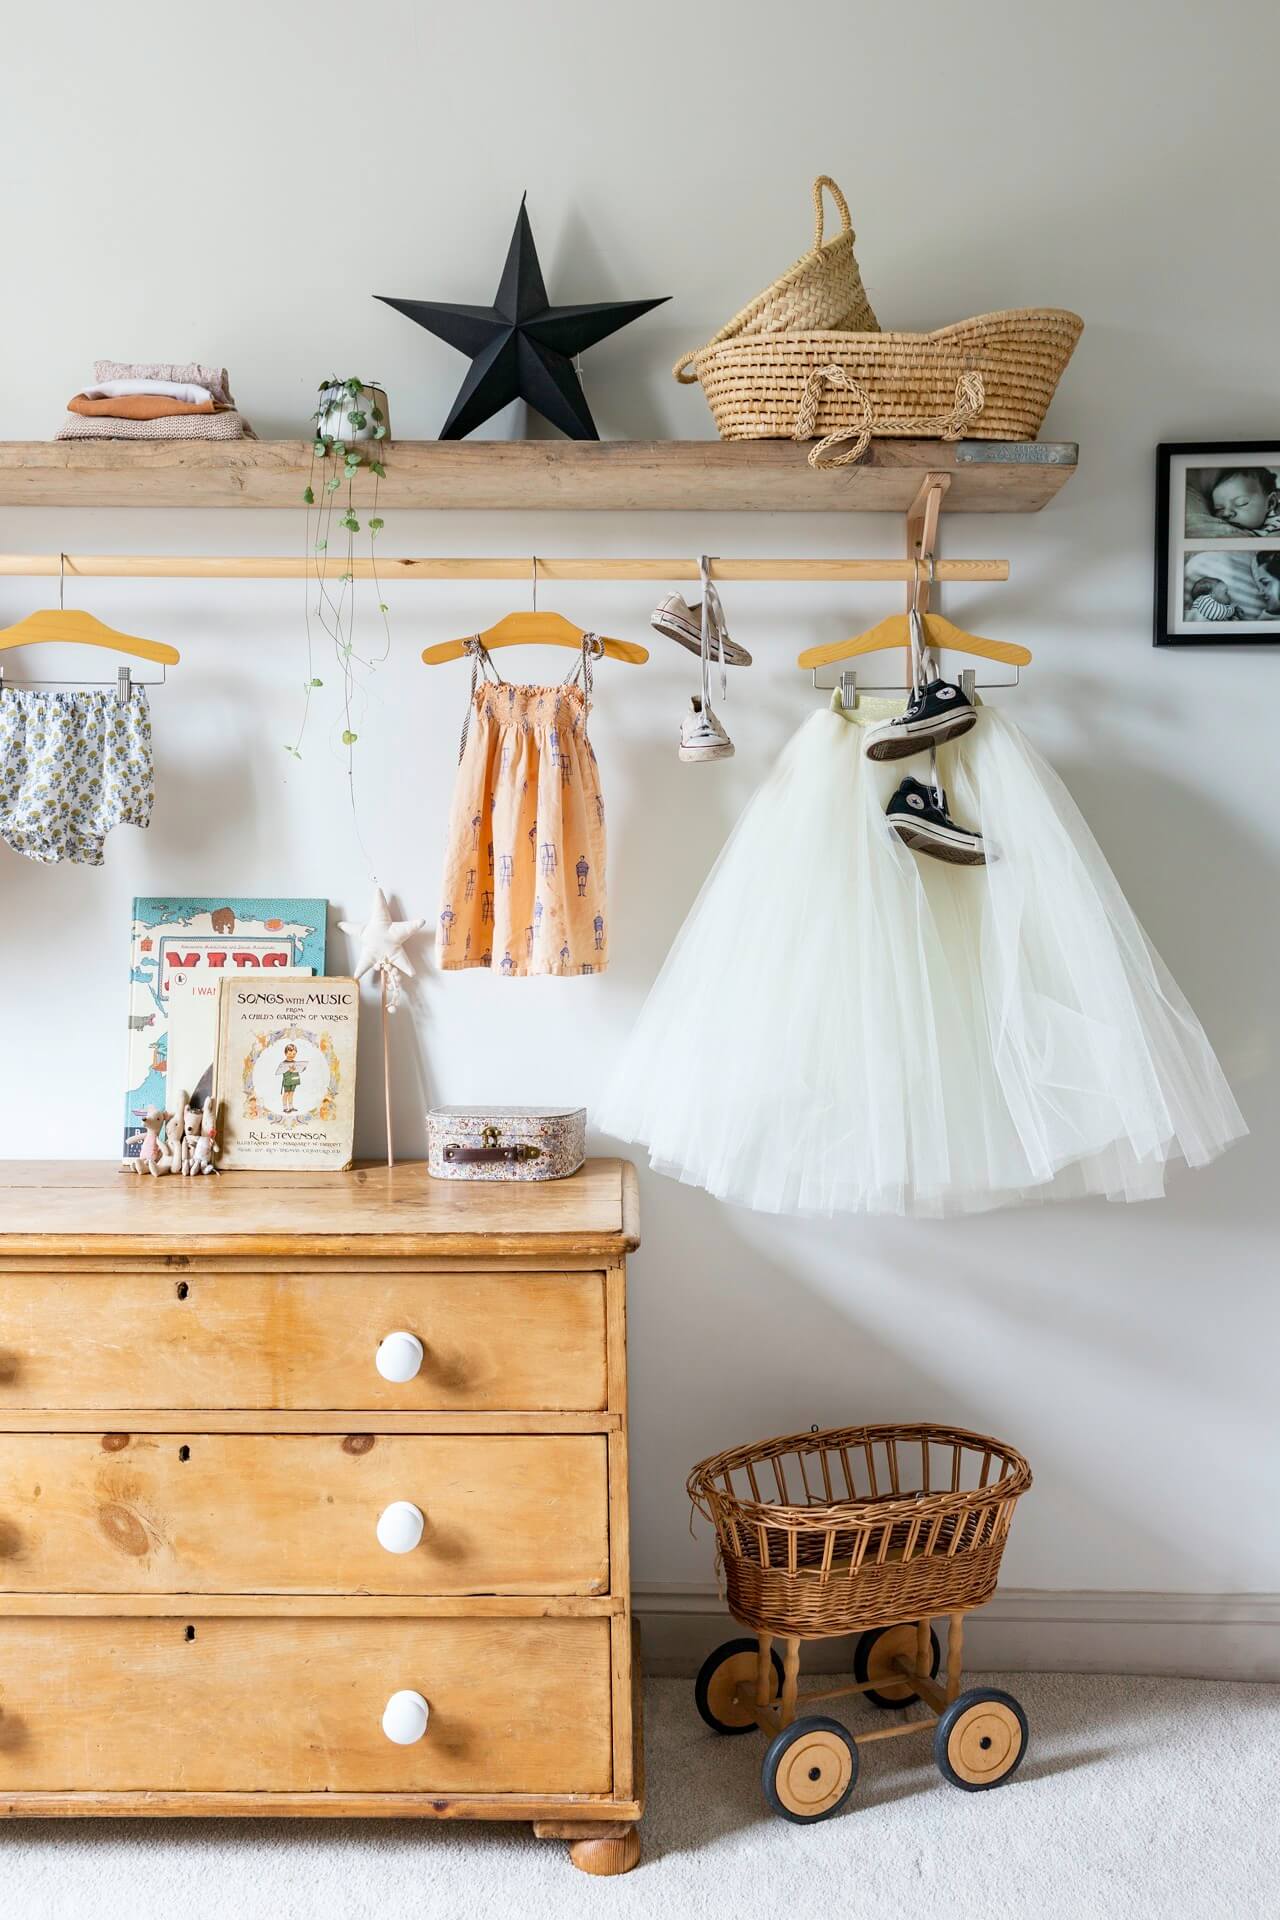 Child's bedroom with vintage furniture and pretty object hanging up